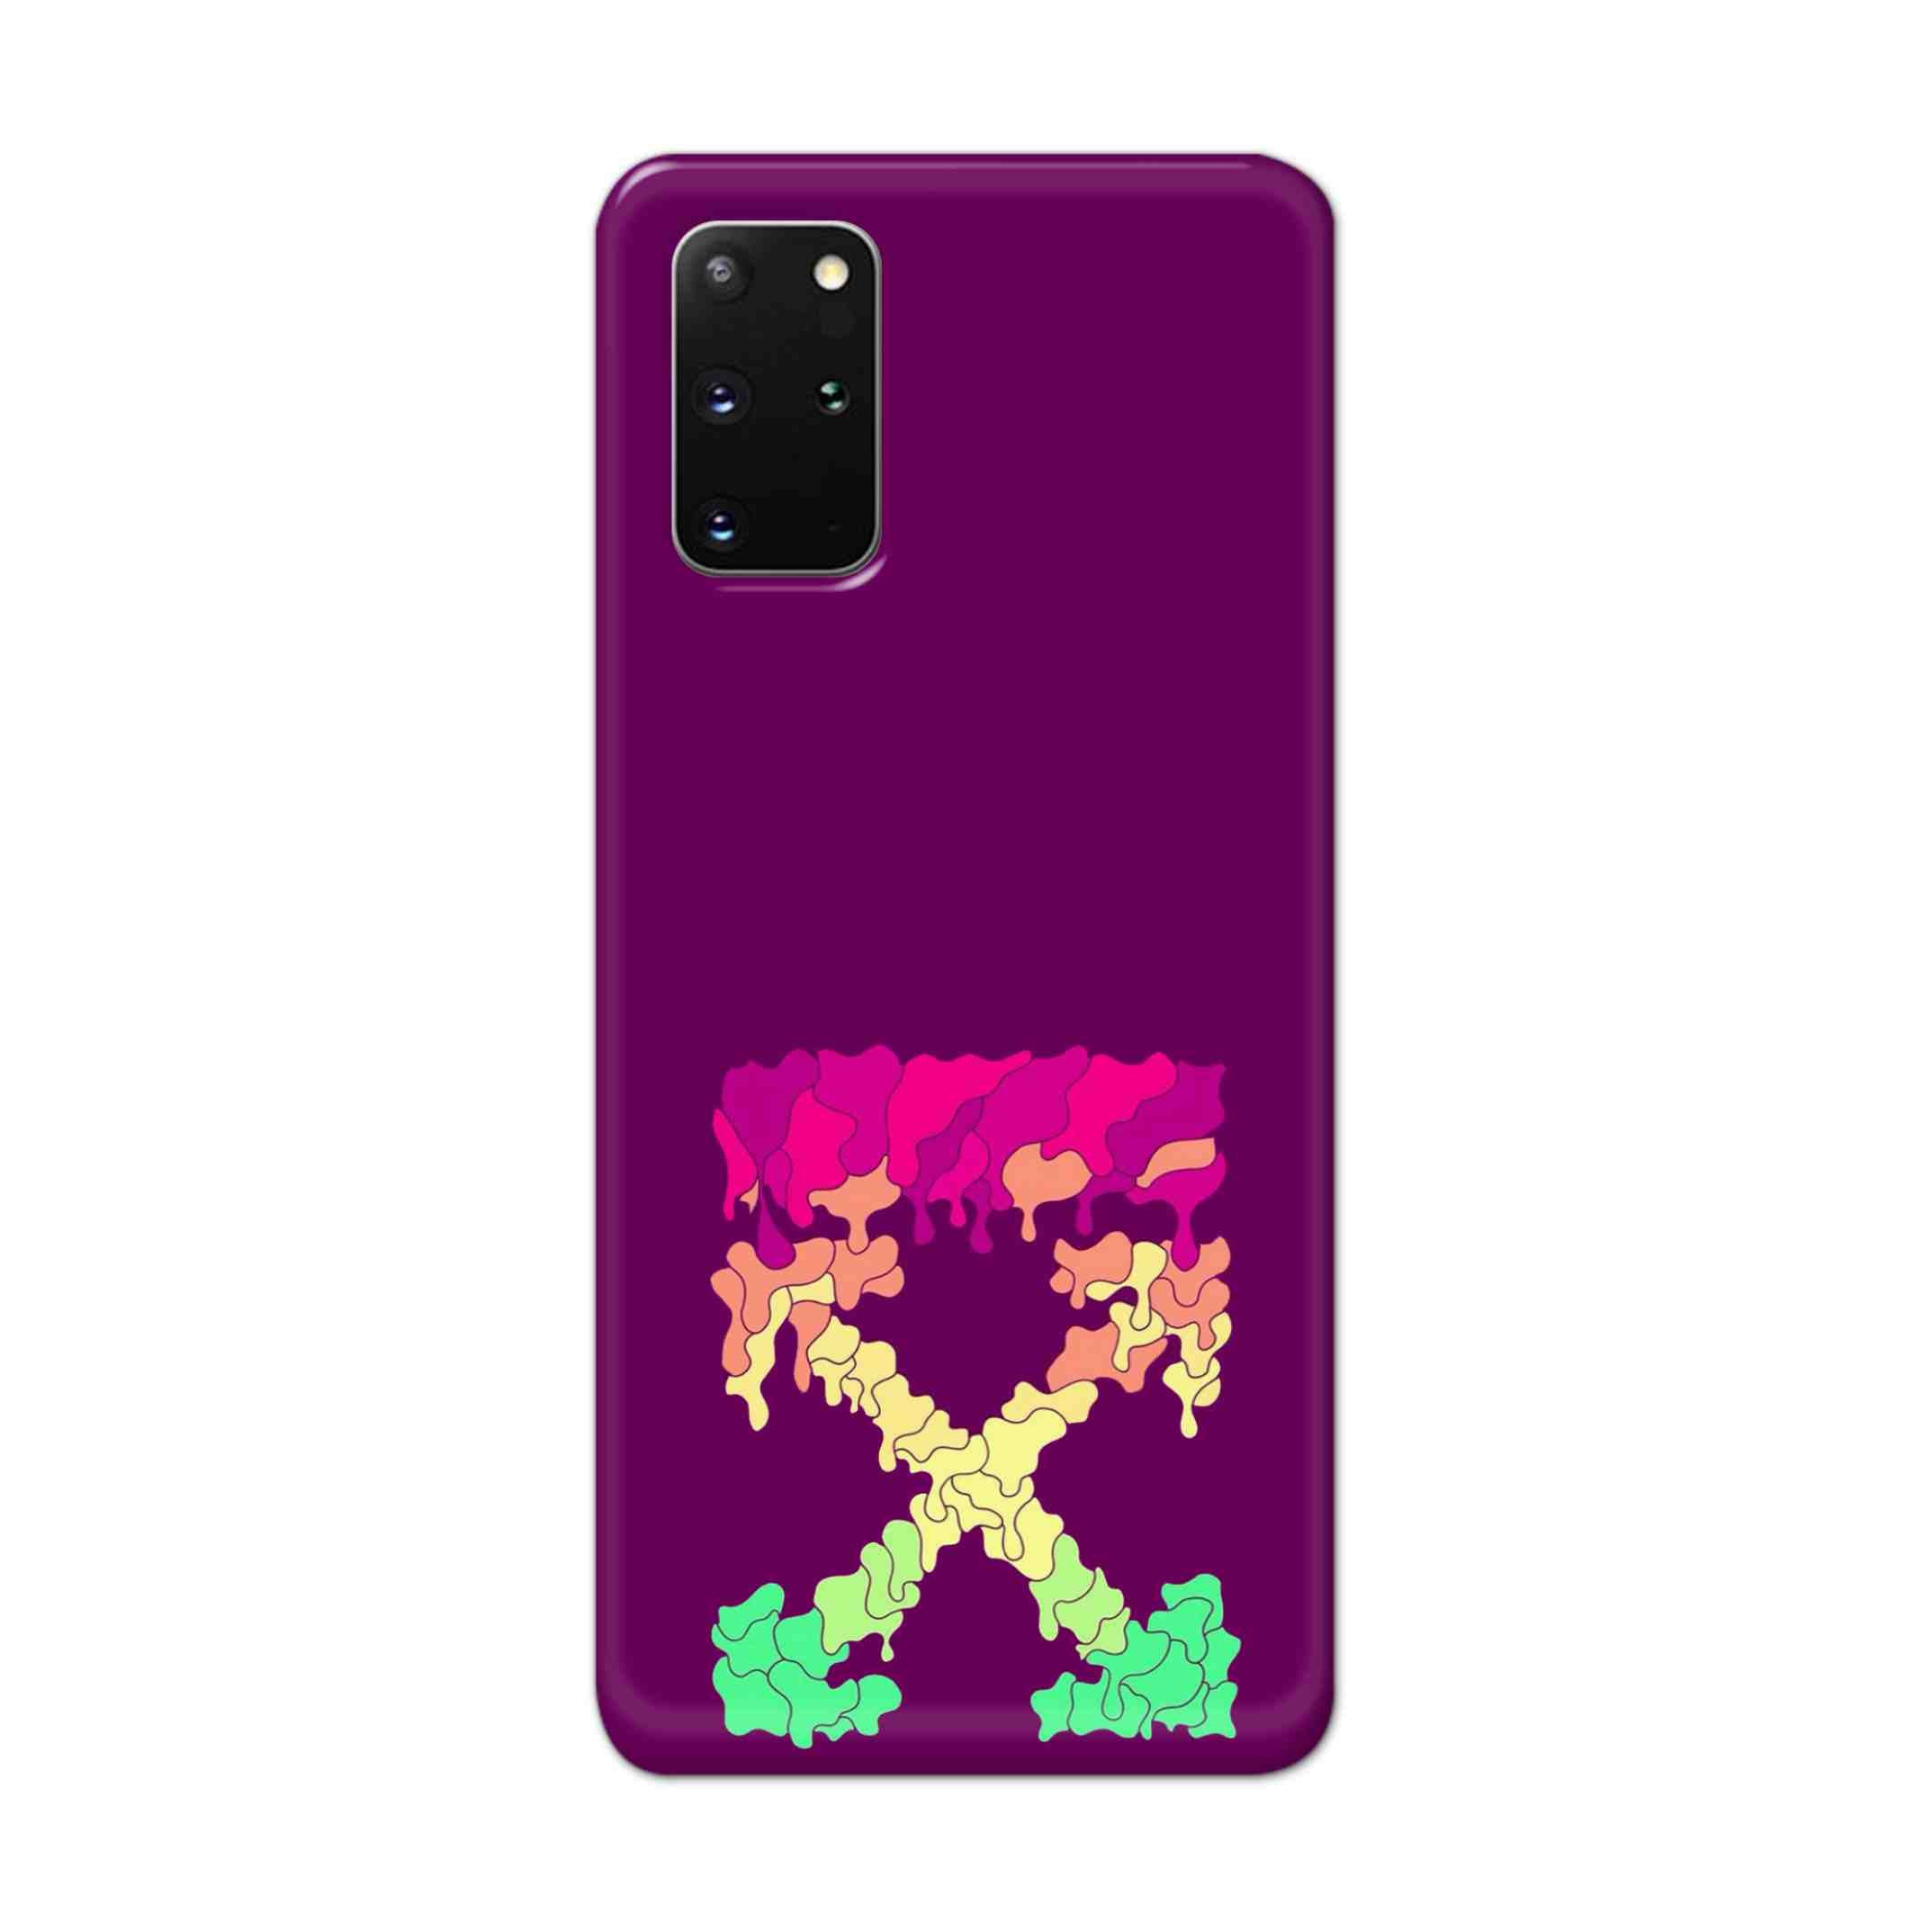 Buy X.O Hard Back Mobile Phone Case Cover For Samsung Galaxy S20 Plus Online